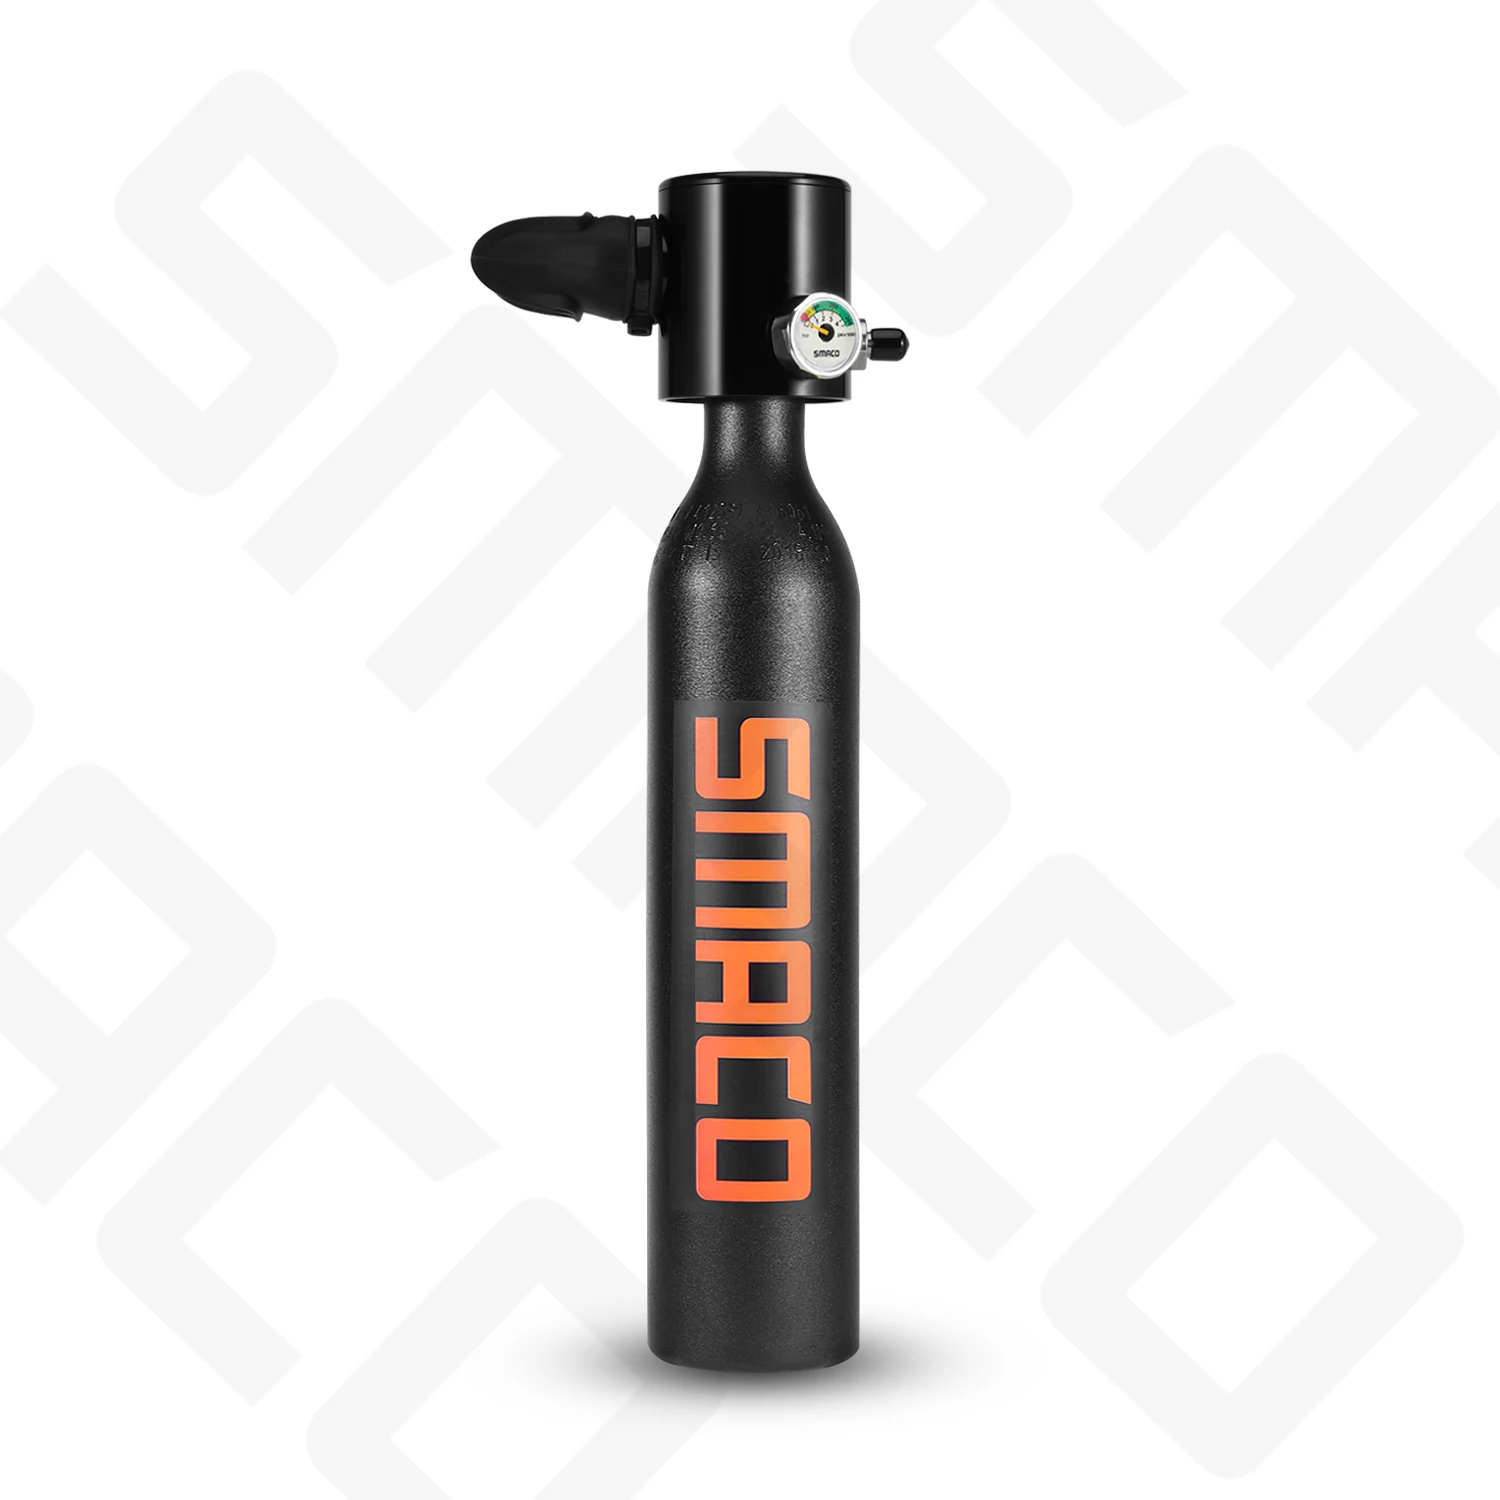 SMACO Diving Equipment oxygen cylinder set Mini scuba tank total freedom breath underwater for 5 a 10 minuti